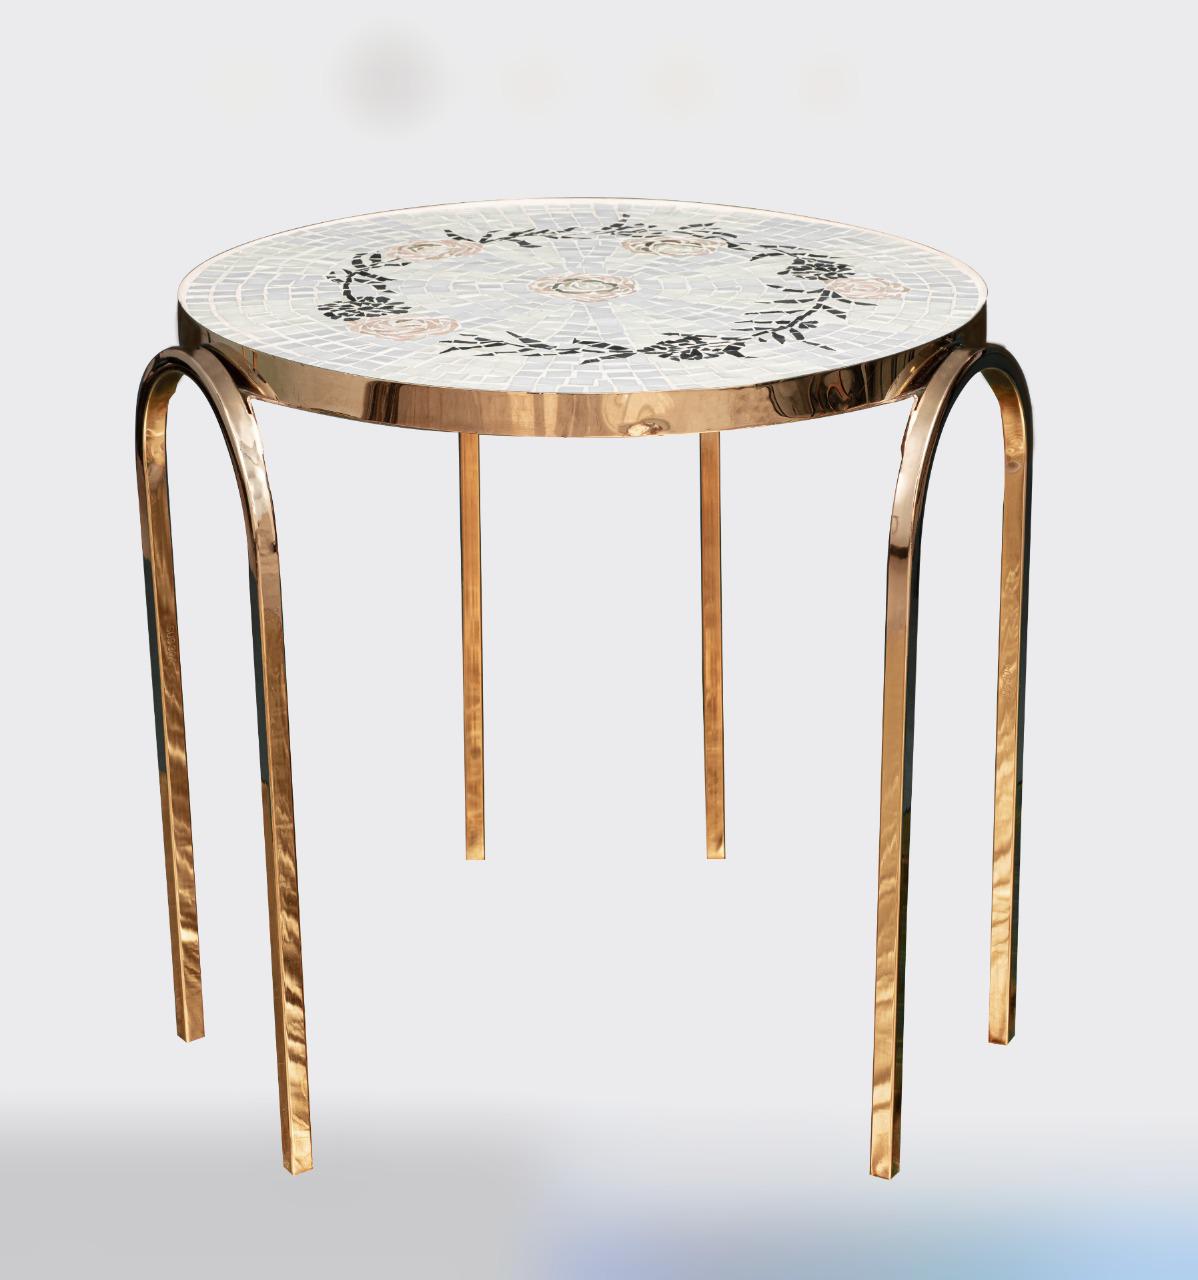 Dome side table I